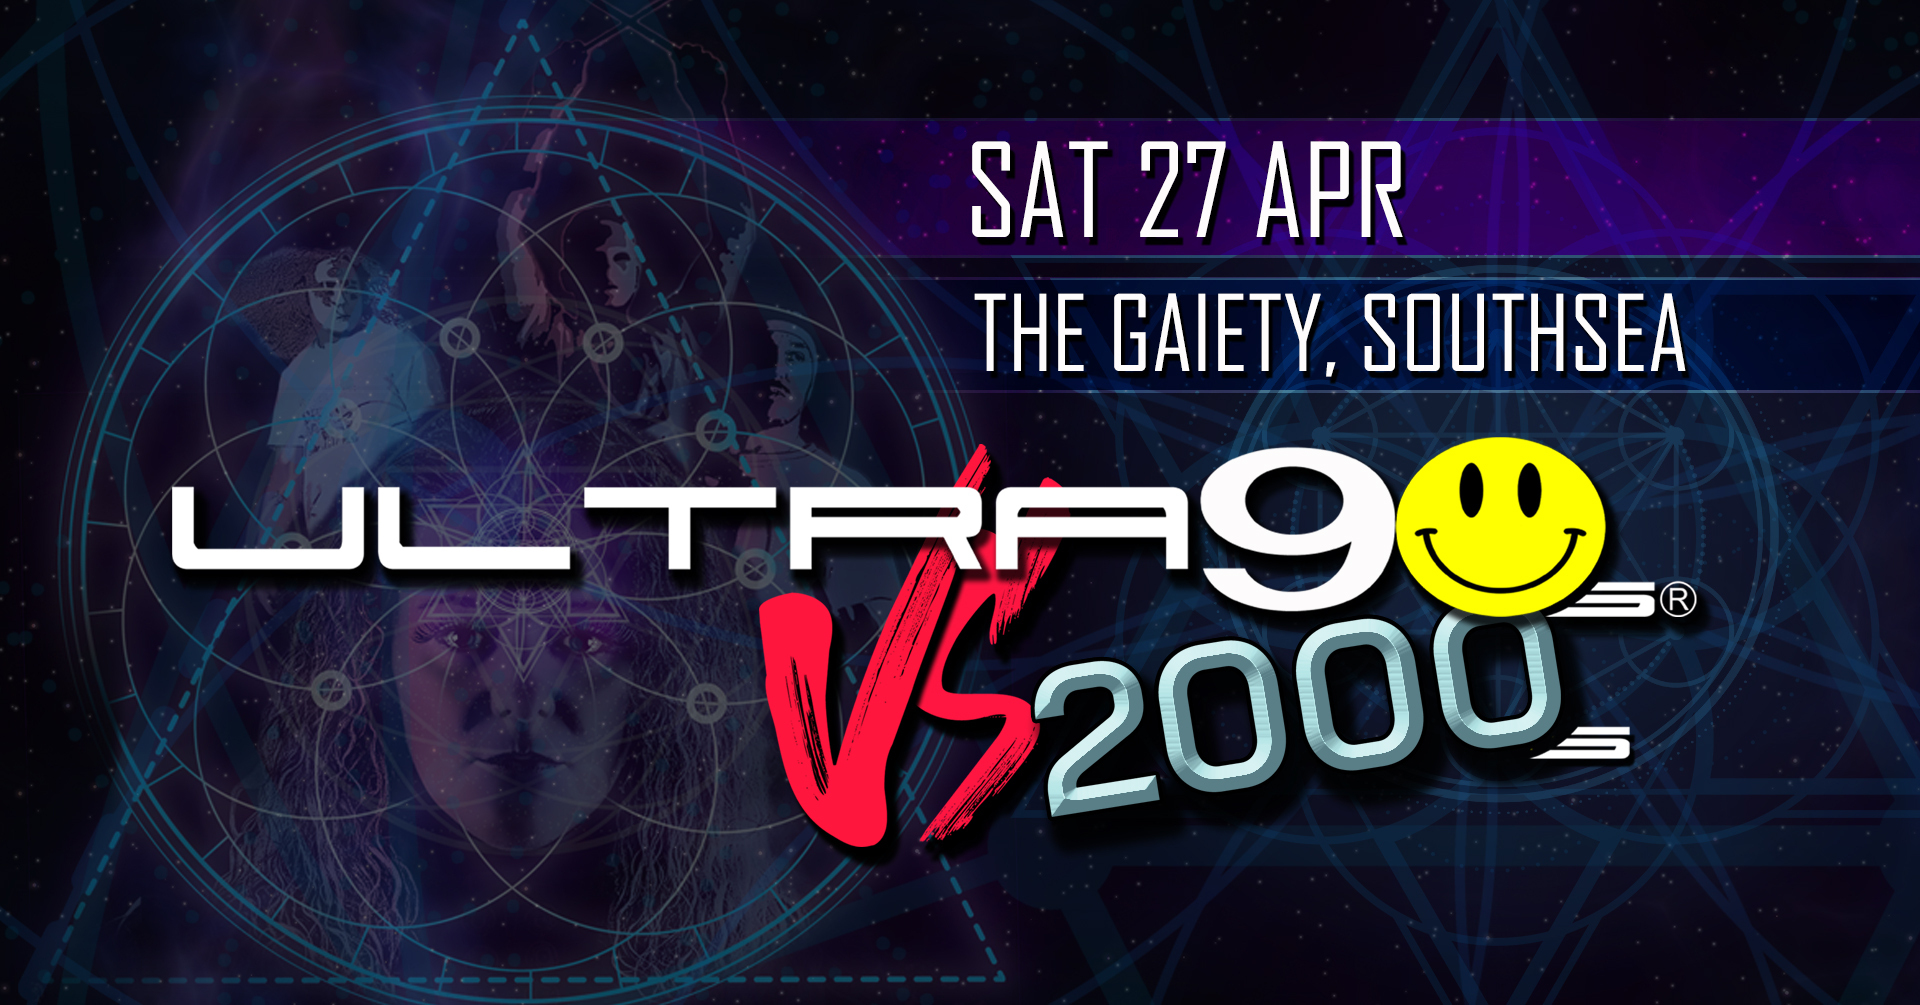 Ultra 90s Vs 2000s - Live at The Gaiety, Southsea, Portsmouth - Live Dance Anthems, Portsmouth, United Kingdom